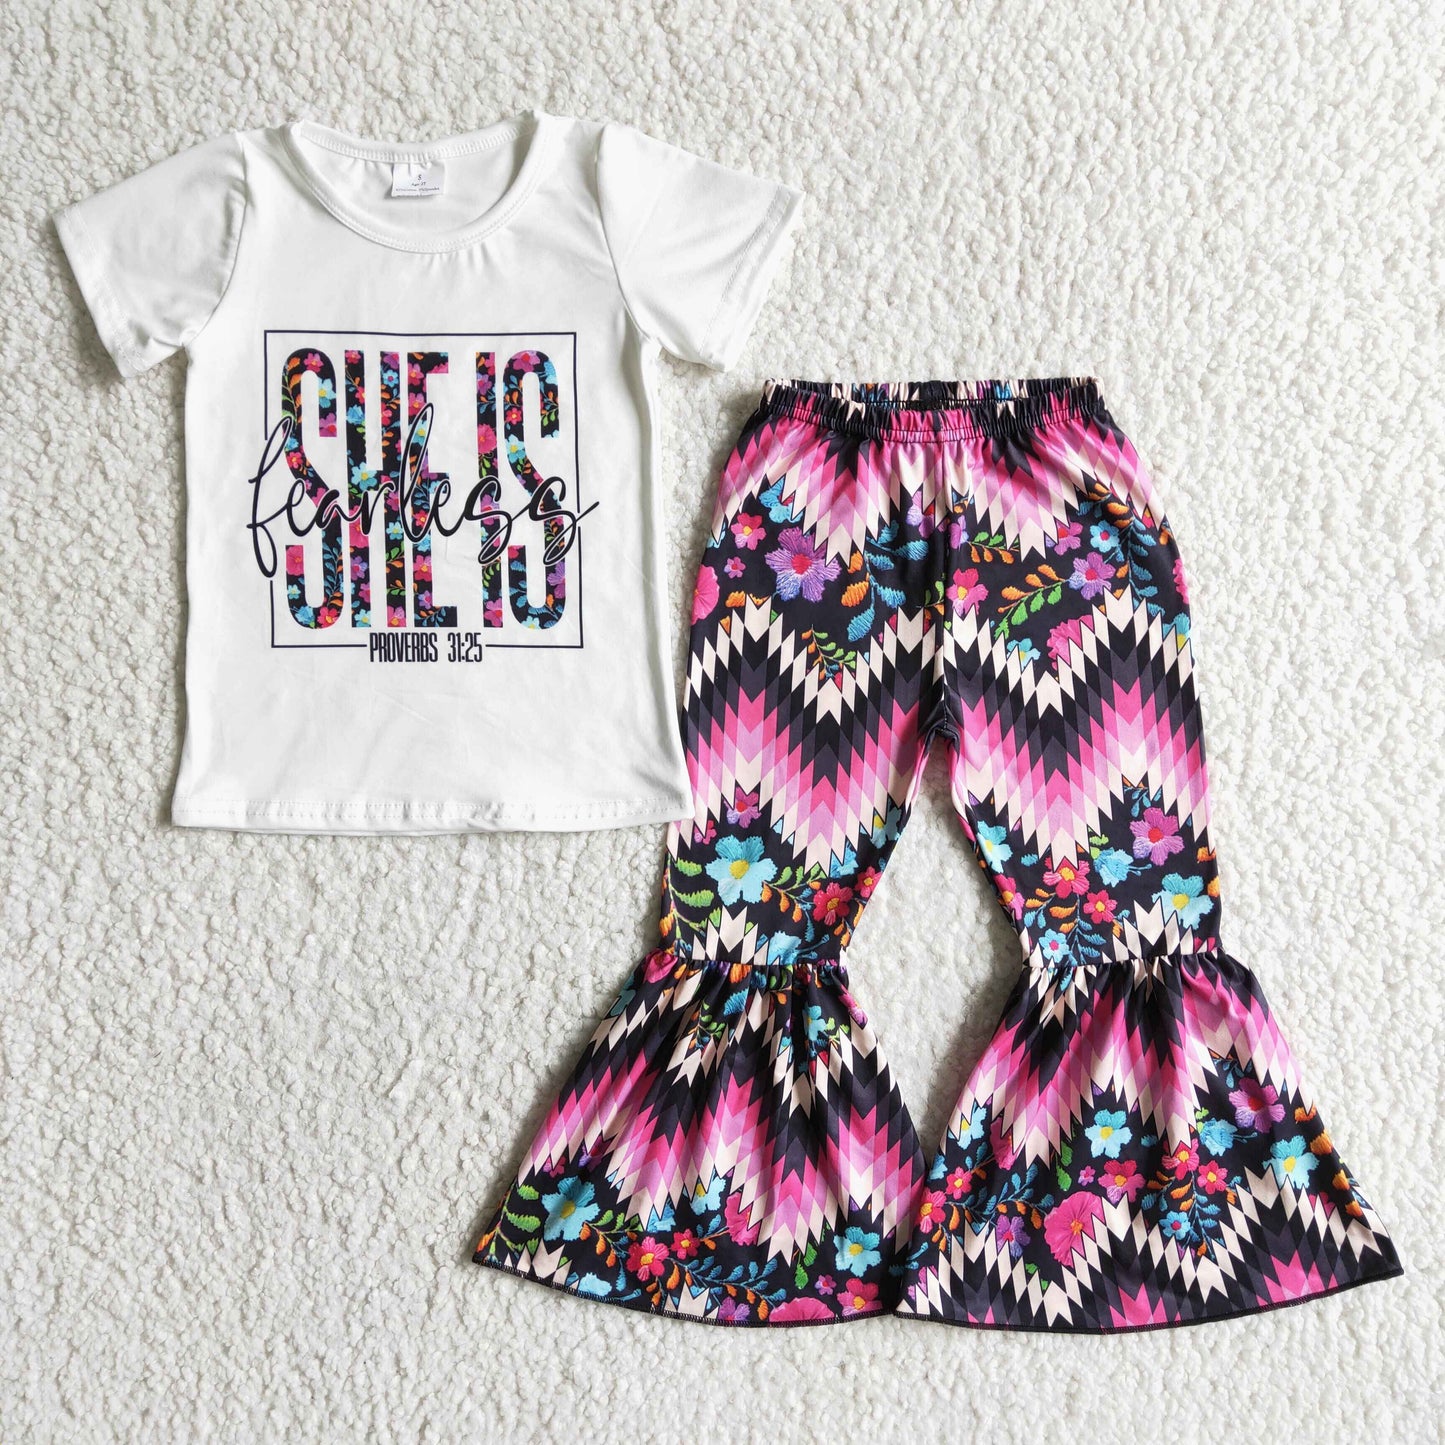 She is fearless shirt bell bottom pants girls clothing set